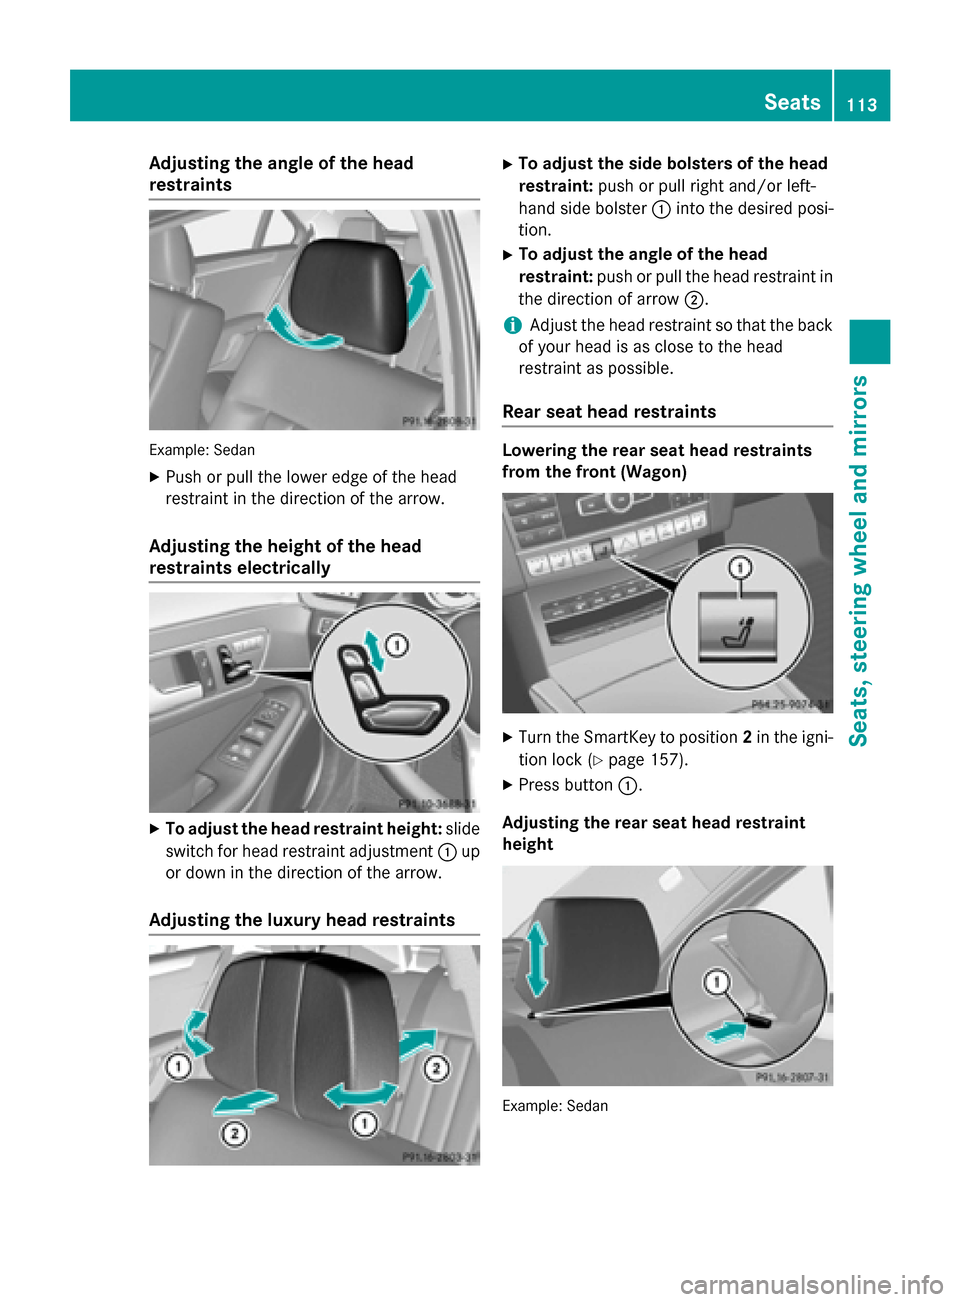 MERCEDES-BENZ E-Class SEDAN 2015 W212 Owners Manual Adjusting the angle of the head
restraints Example: Sedan
X Push or pull the lower edge of the head
restraint in the direction of the arrow.
Adjusting the height of the head
restraints electrically X
